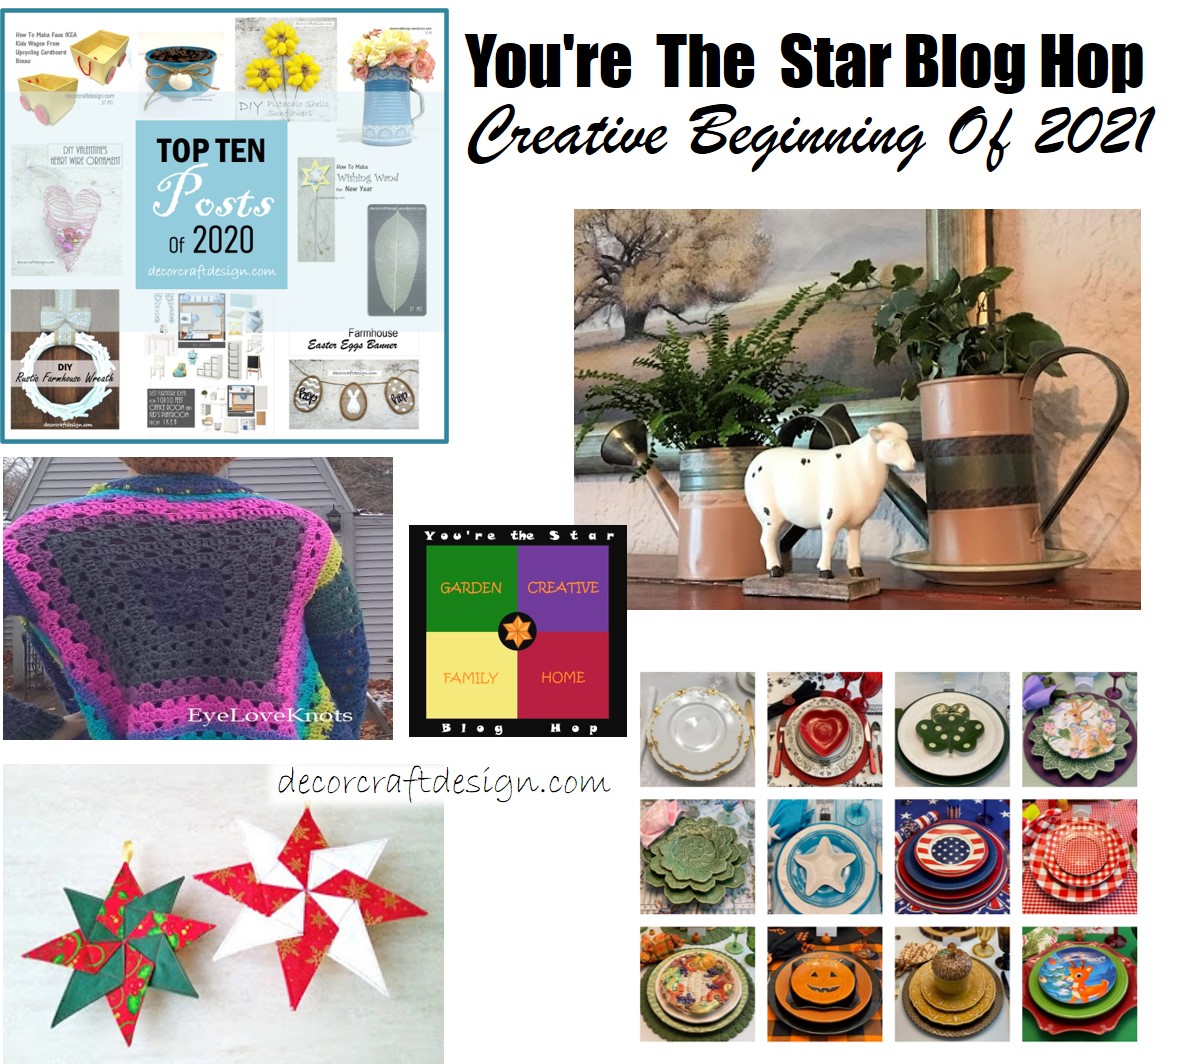 You’re The Star Blog Hop Creative Beginning Of 2021